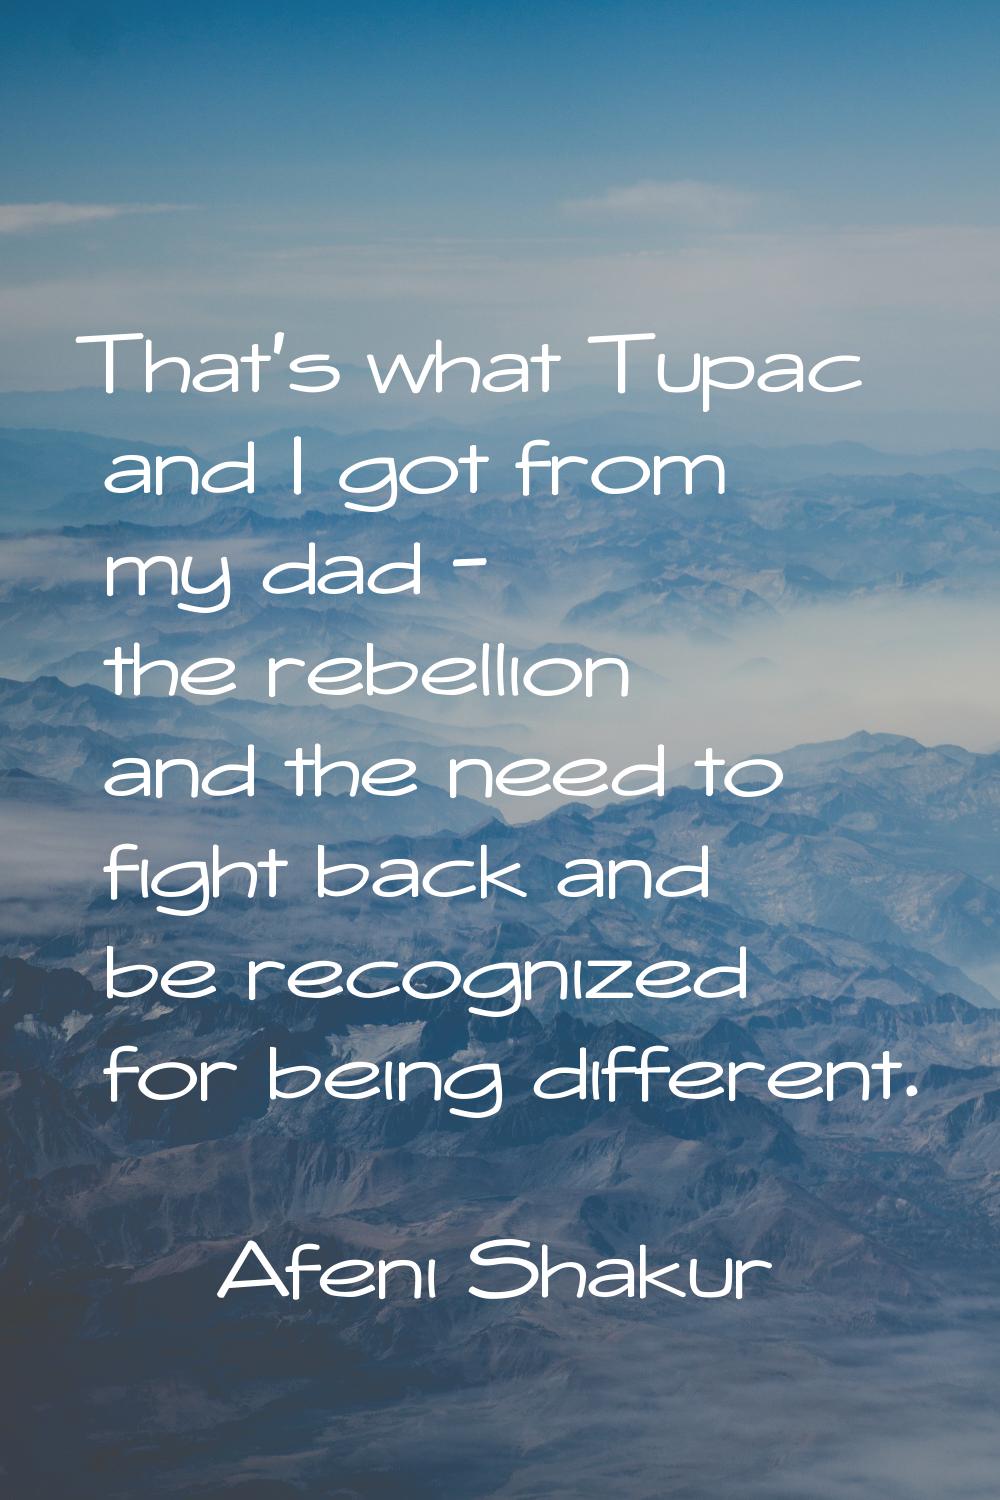 That's what Tupac and I got from my dad - the rebellion and the need to fight back and be recognize